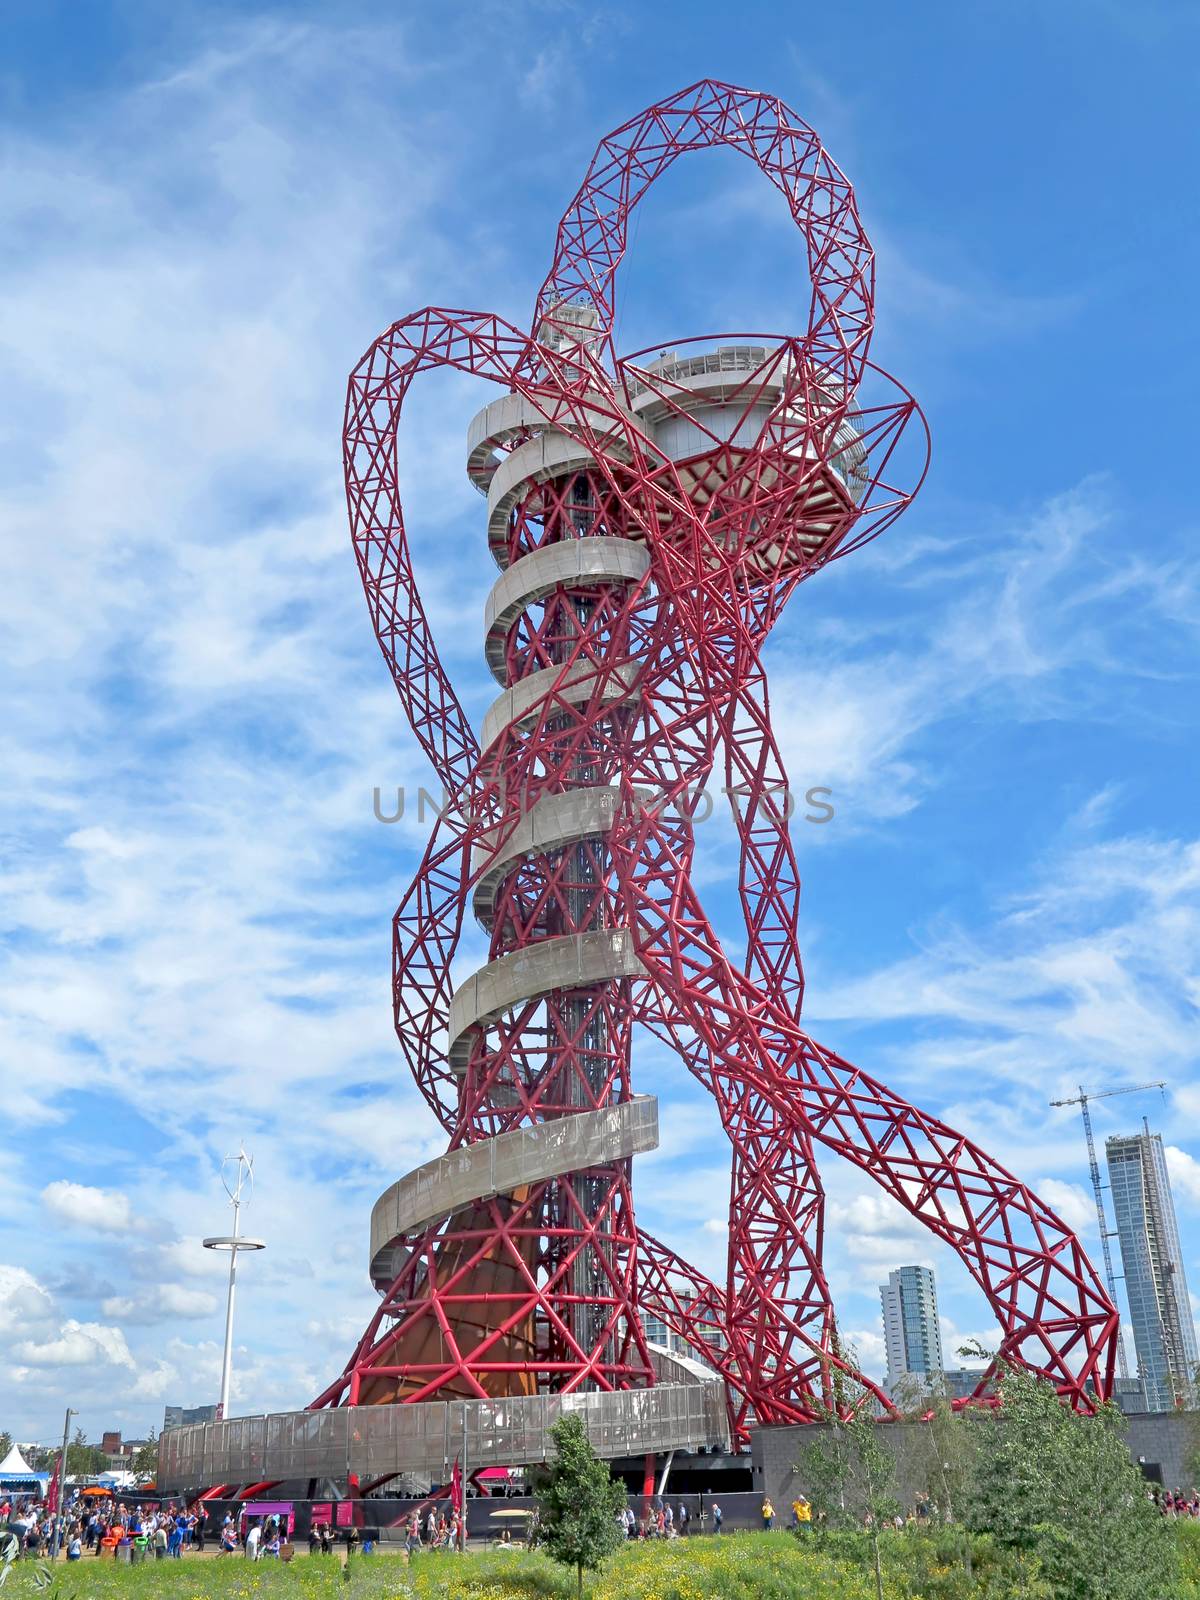 ArcelorMittal Orbit London Olympic Park by quackersnaps